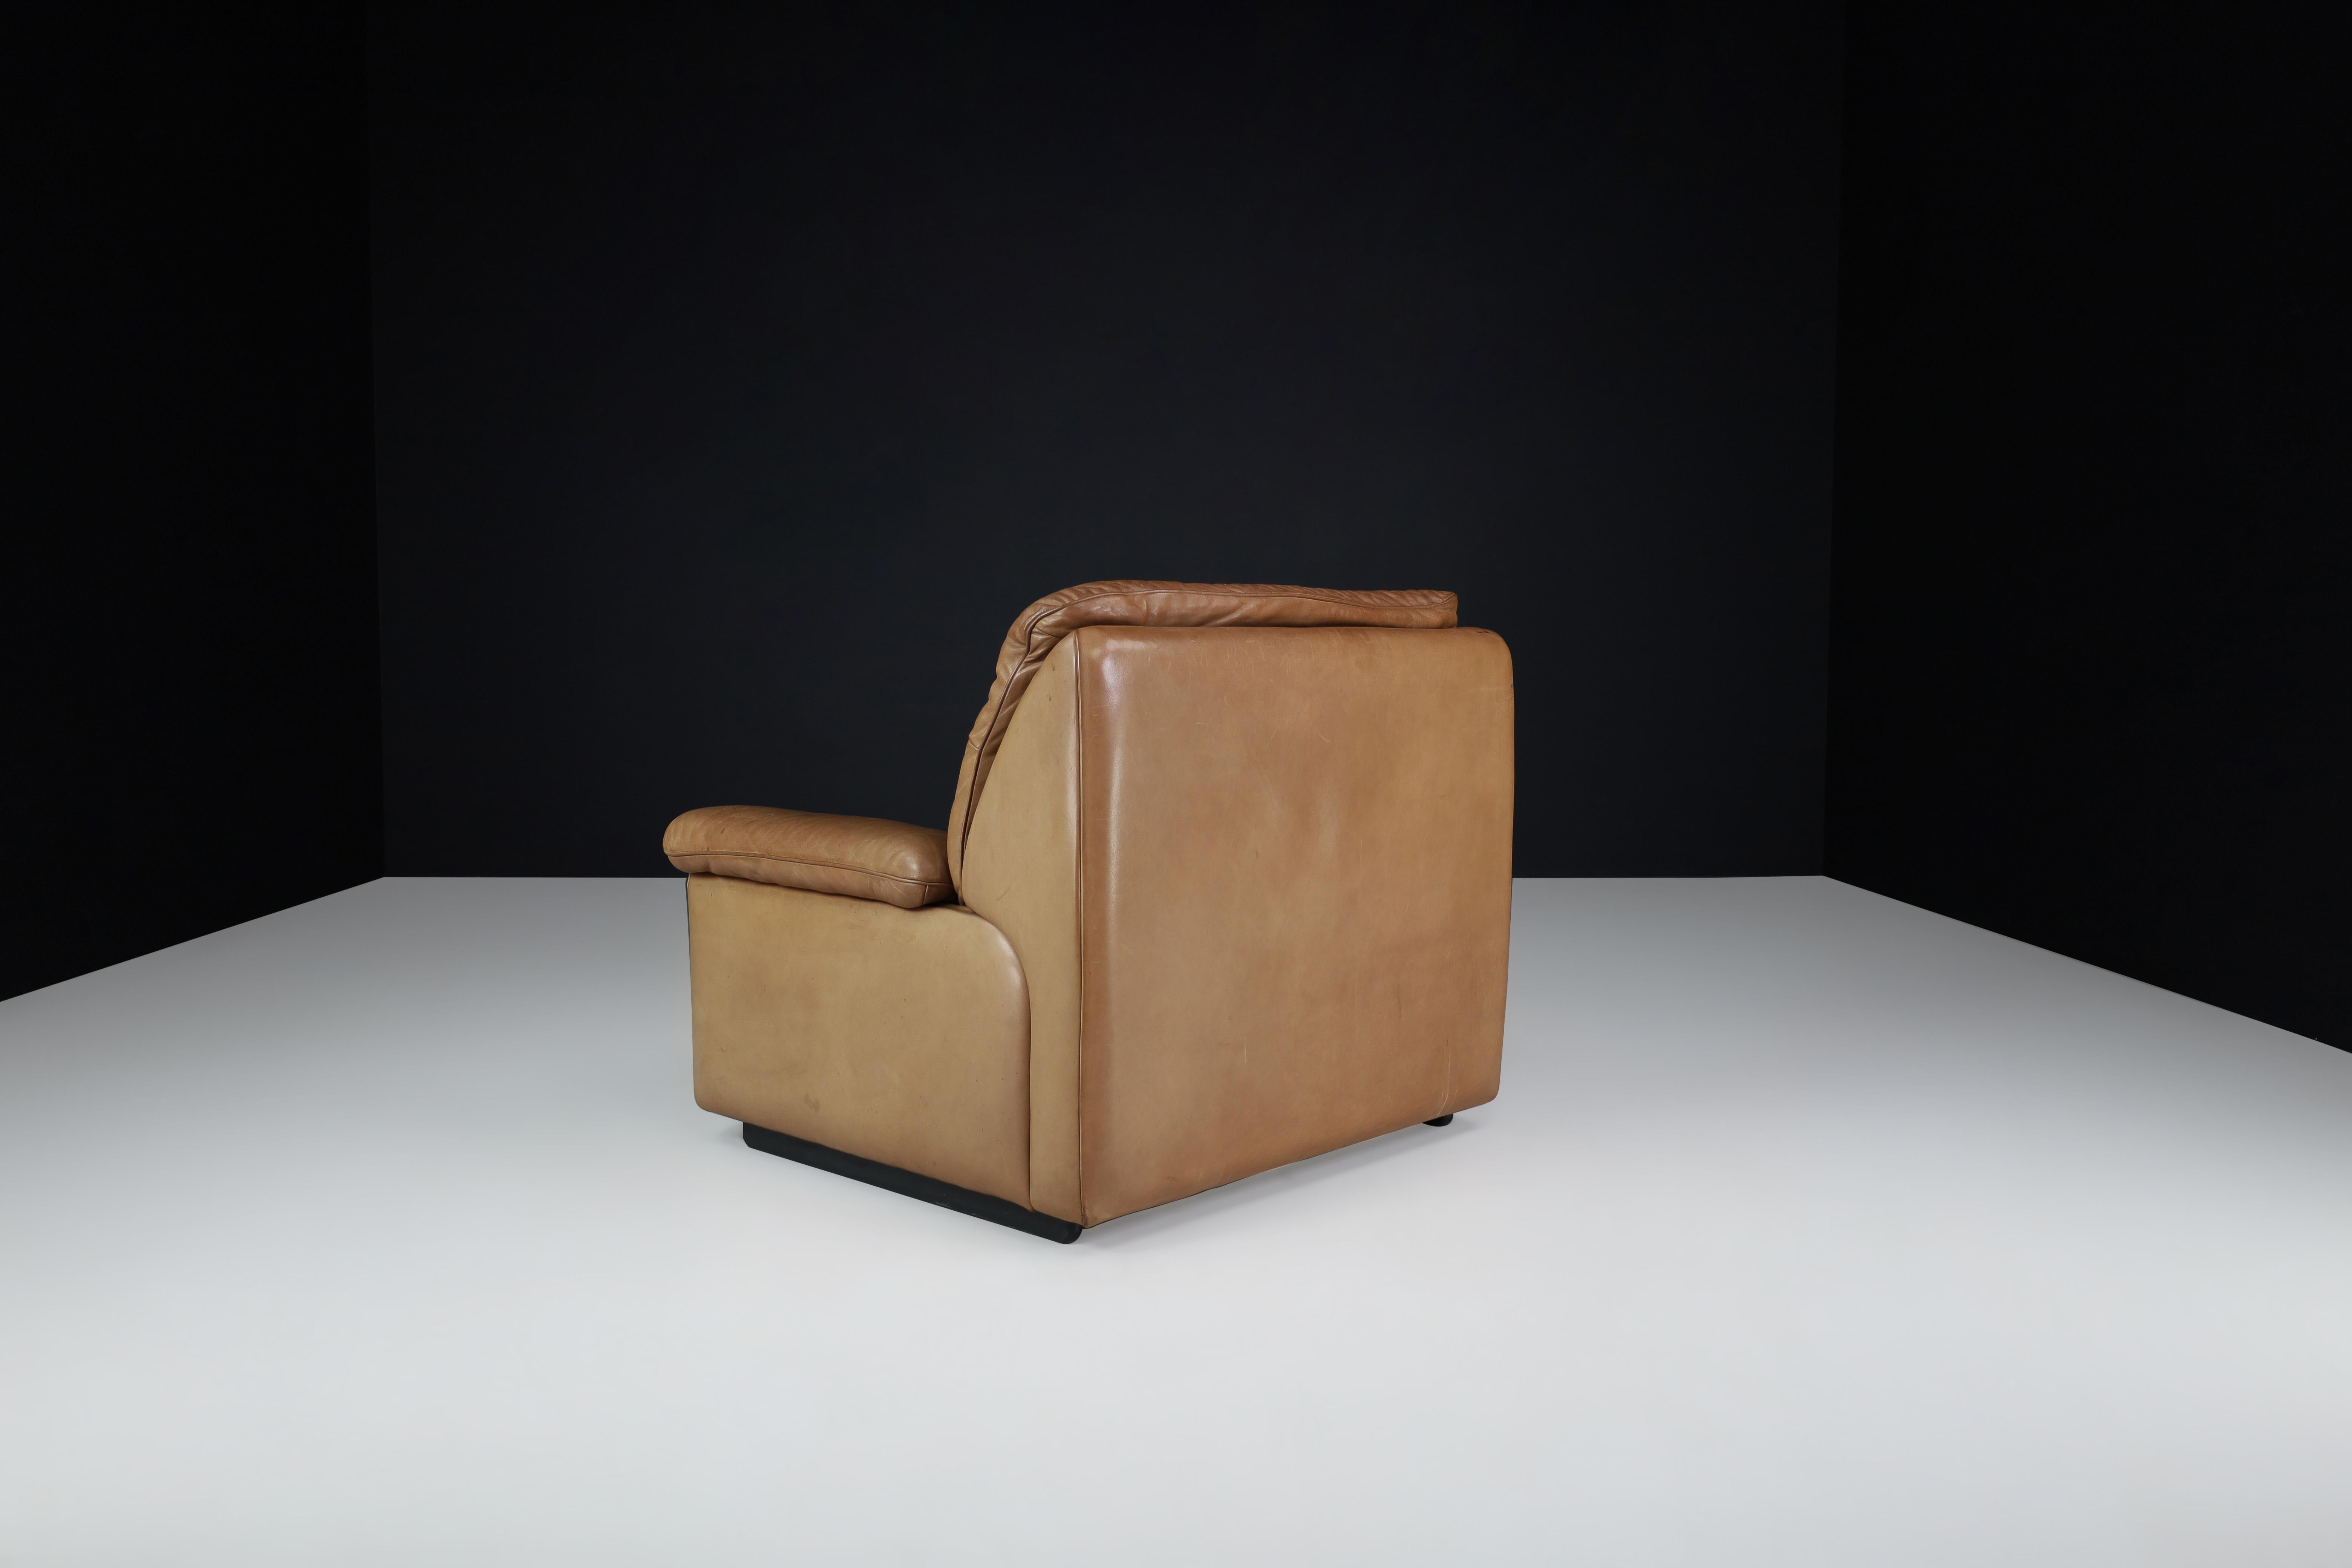 20th Century De Sede Ds 63 Lounge Chair in Patinated Leather, Switzerland, 1970s For Sale